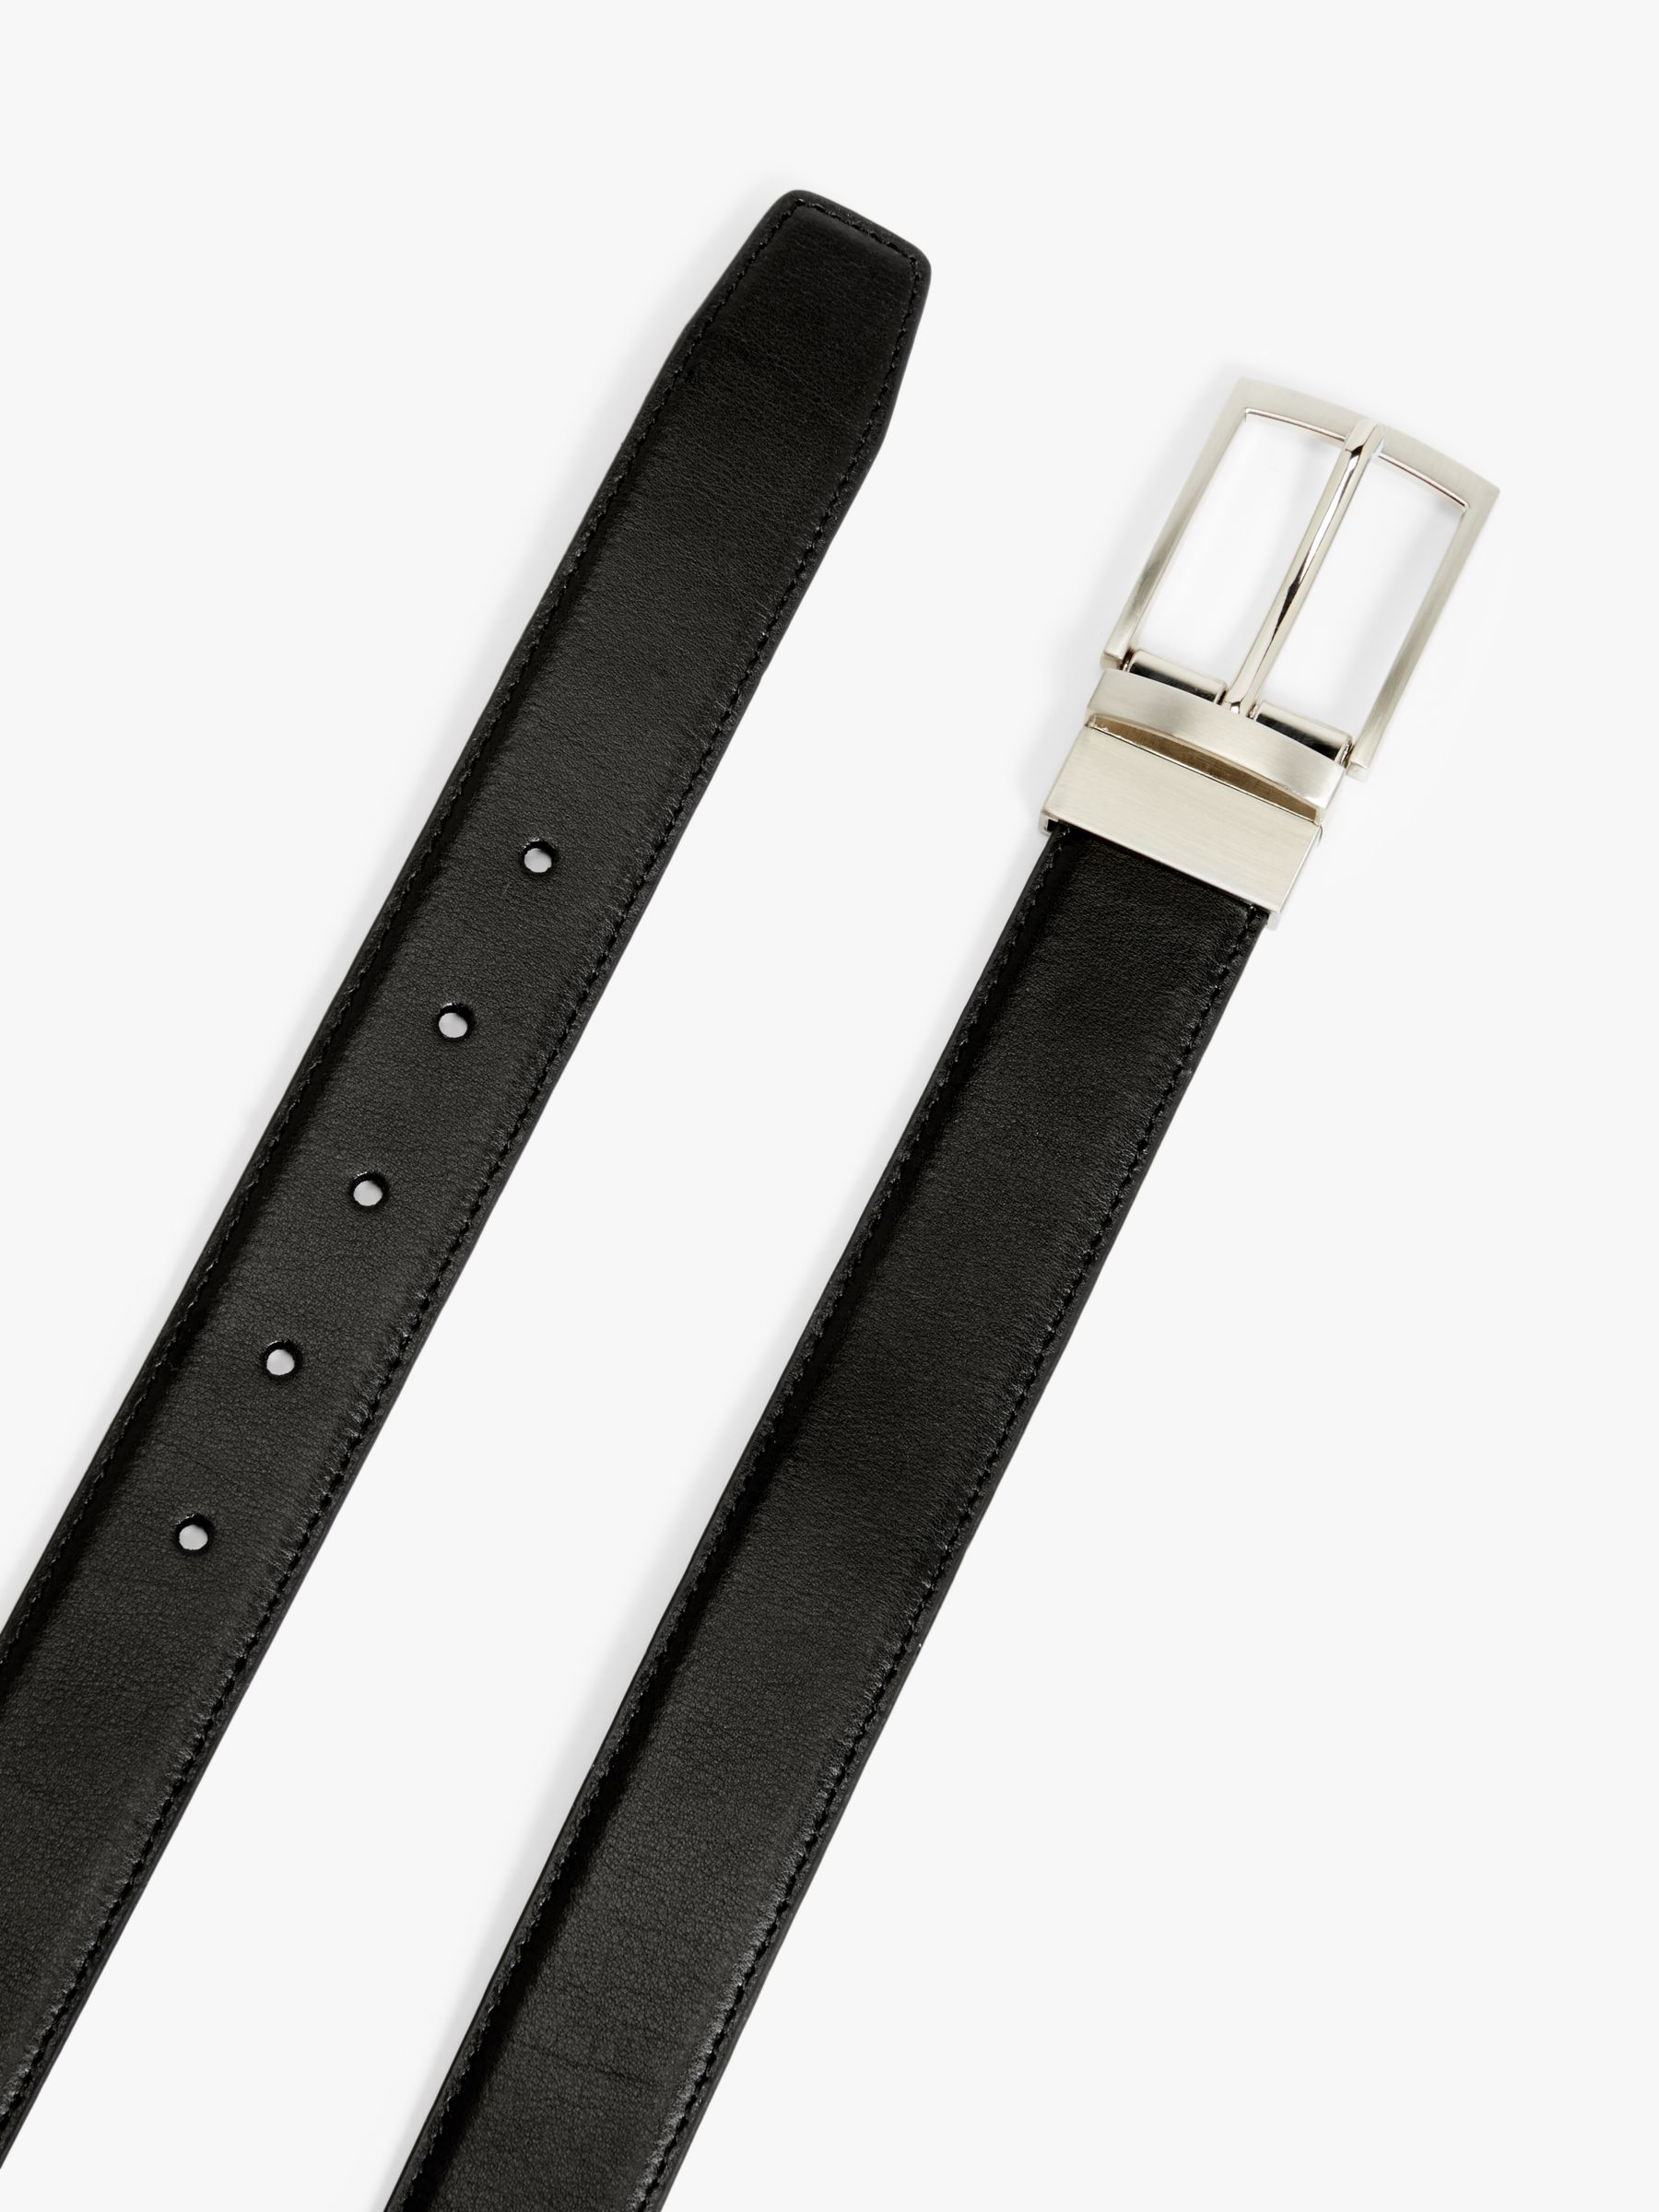 B Volute Scritto Leather 35Mm Reversible Belt